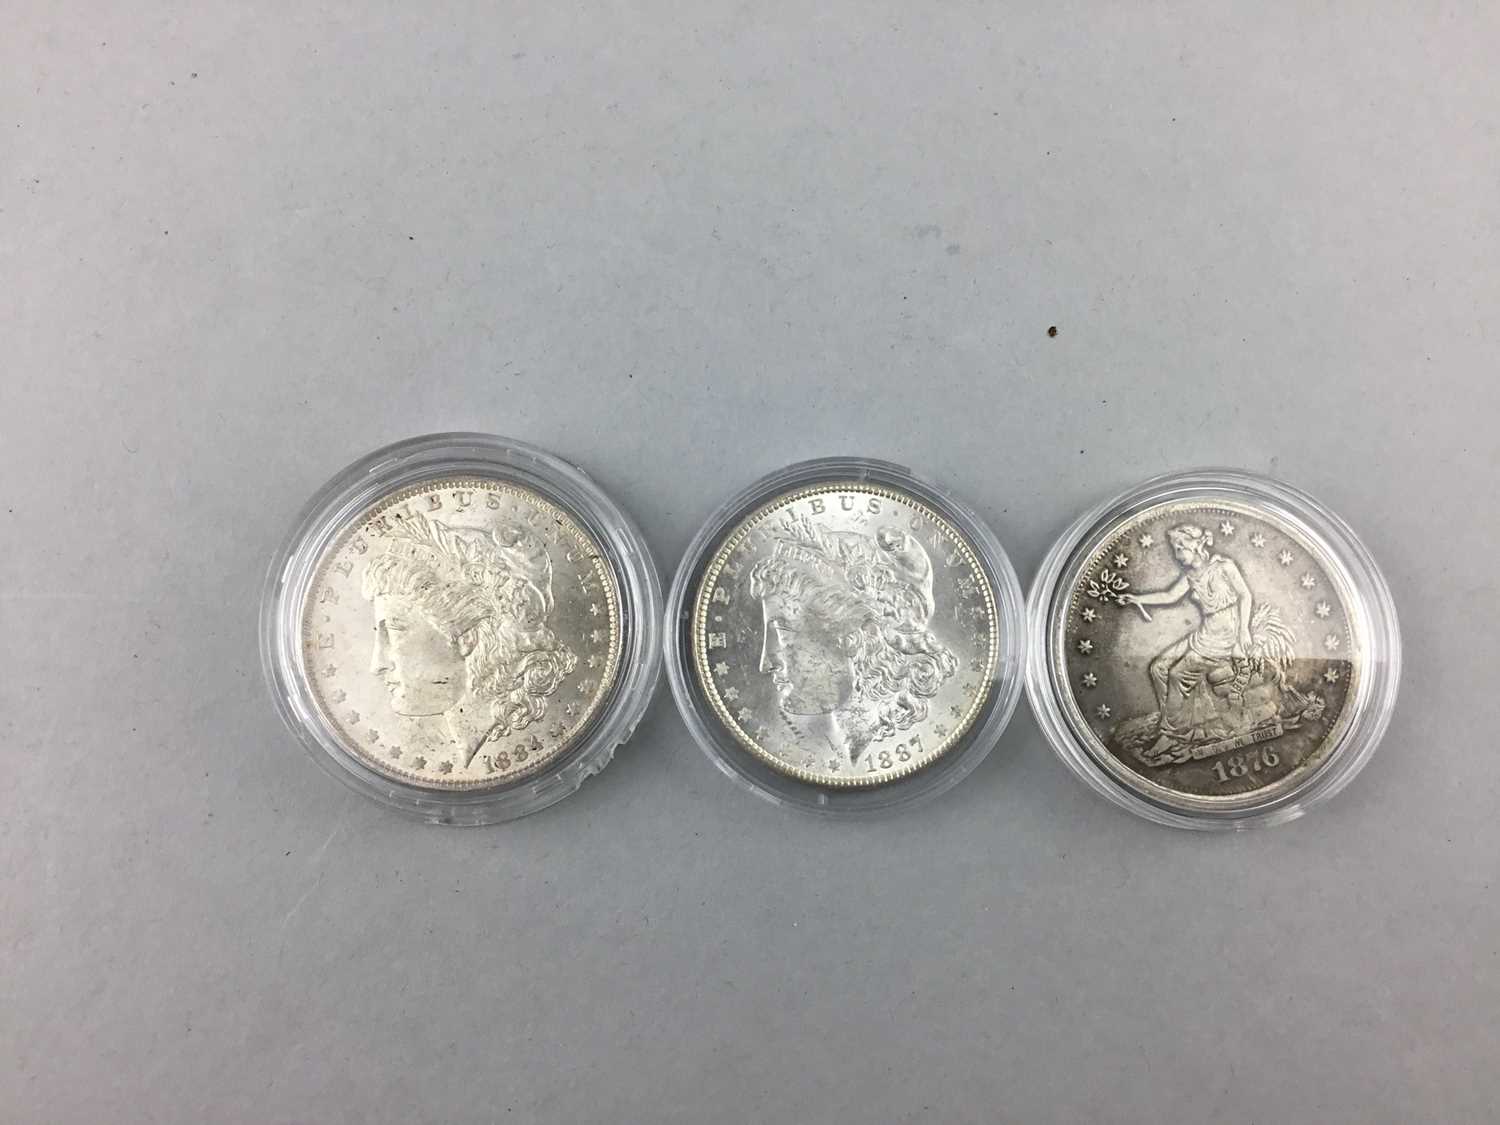 Lot 46 - A LOT OF THREE US $1 COINS